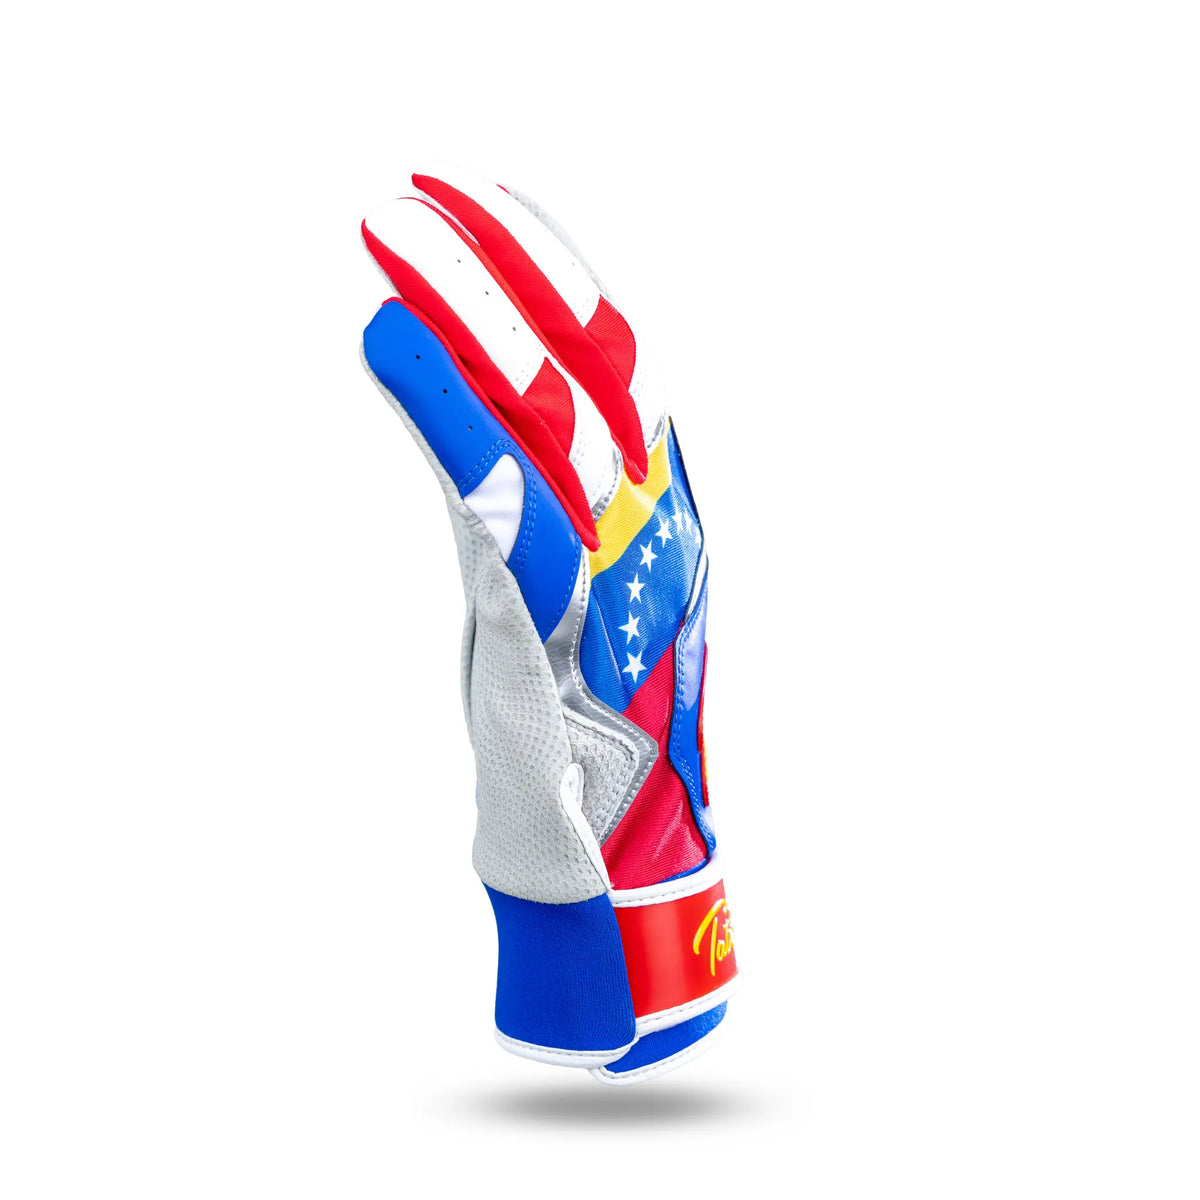 Side view of Tater Baseball batting gloves with a patriotic Venezuelan flag design, featuring a blend of red, yellow, and blue colors with white stars, and the Tater logo prominently displayed on the wrist strap, against a white background for a clean presentation.